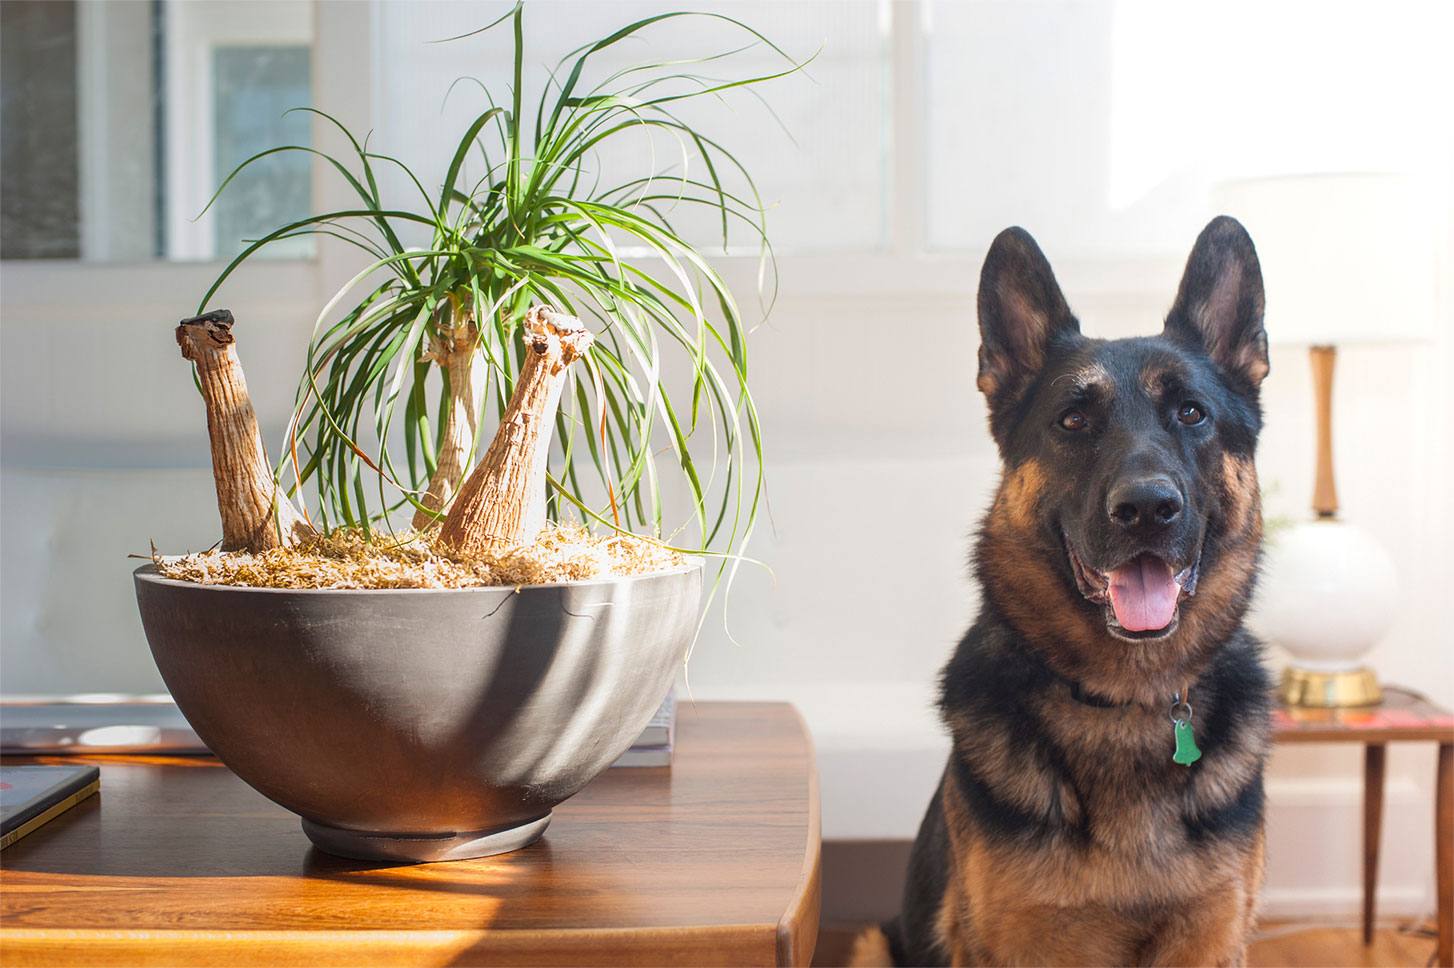 Smiling dog sat next to a plant